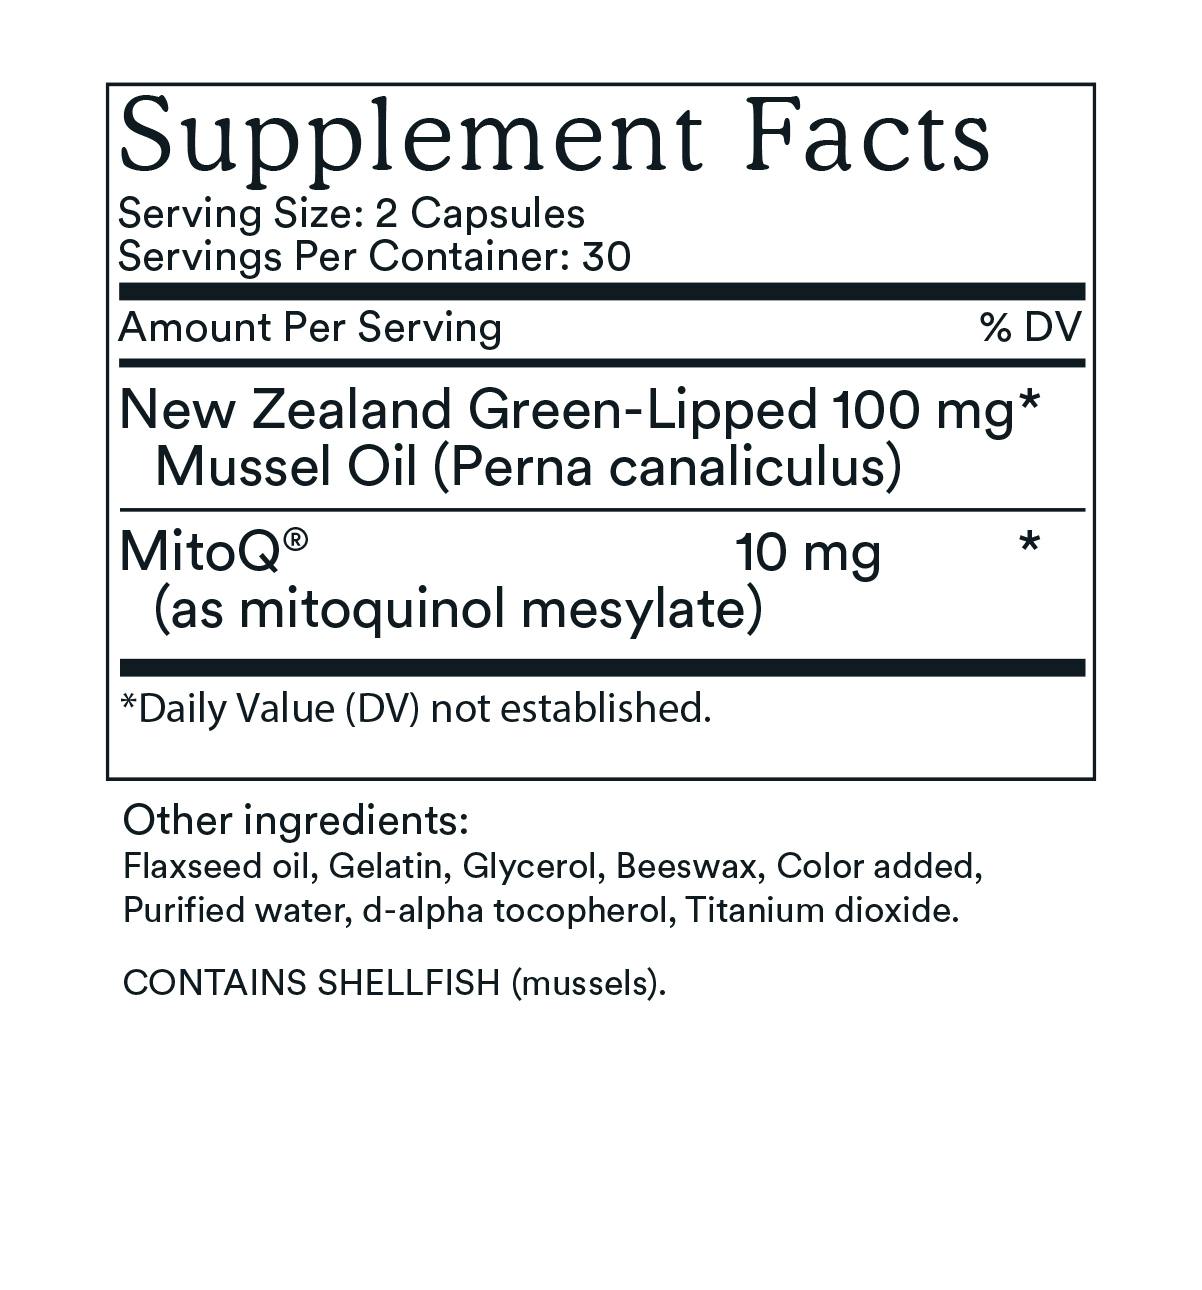 Supplement Facts label for MitoQ +joint